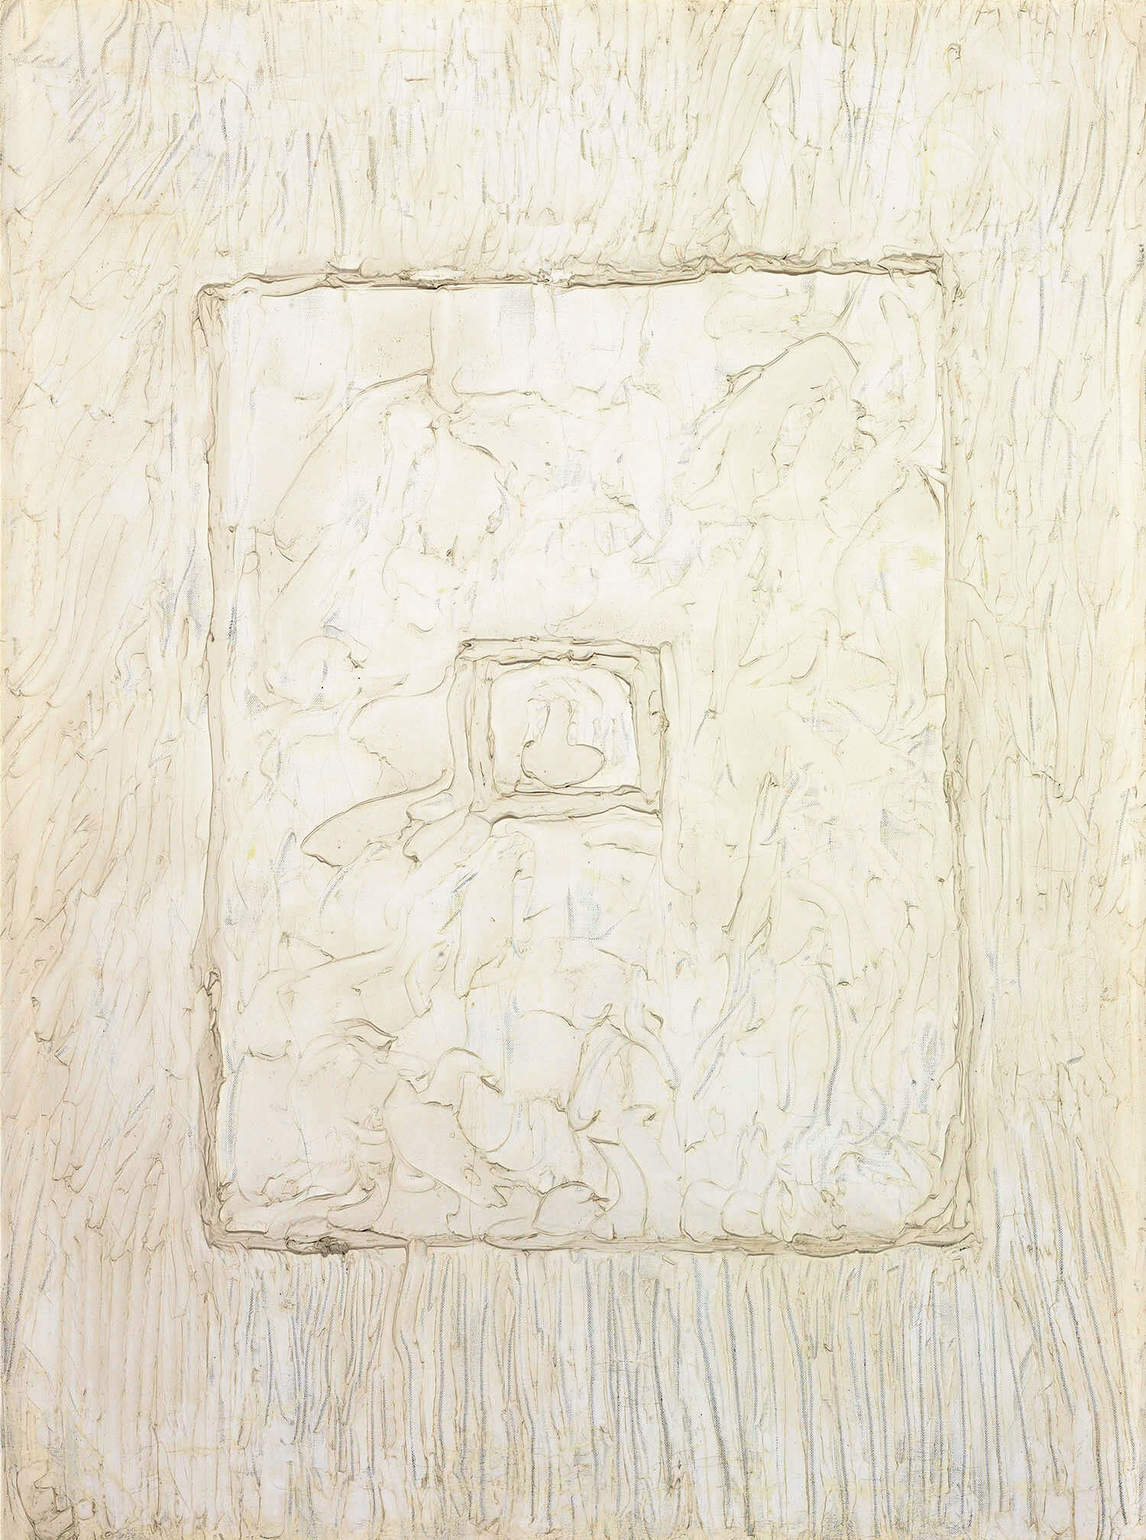 White Abstraction No. 1, 1963, by Paterson Ewen